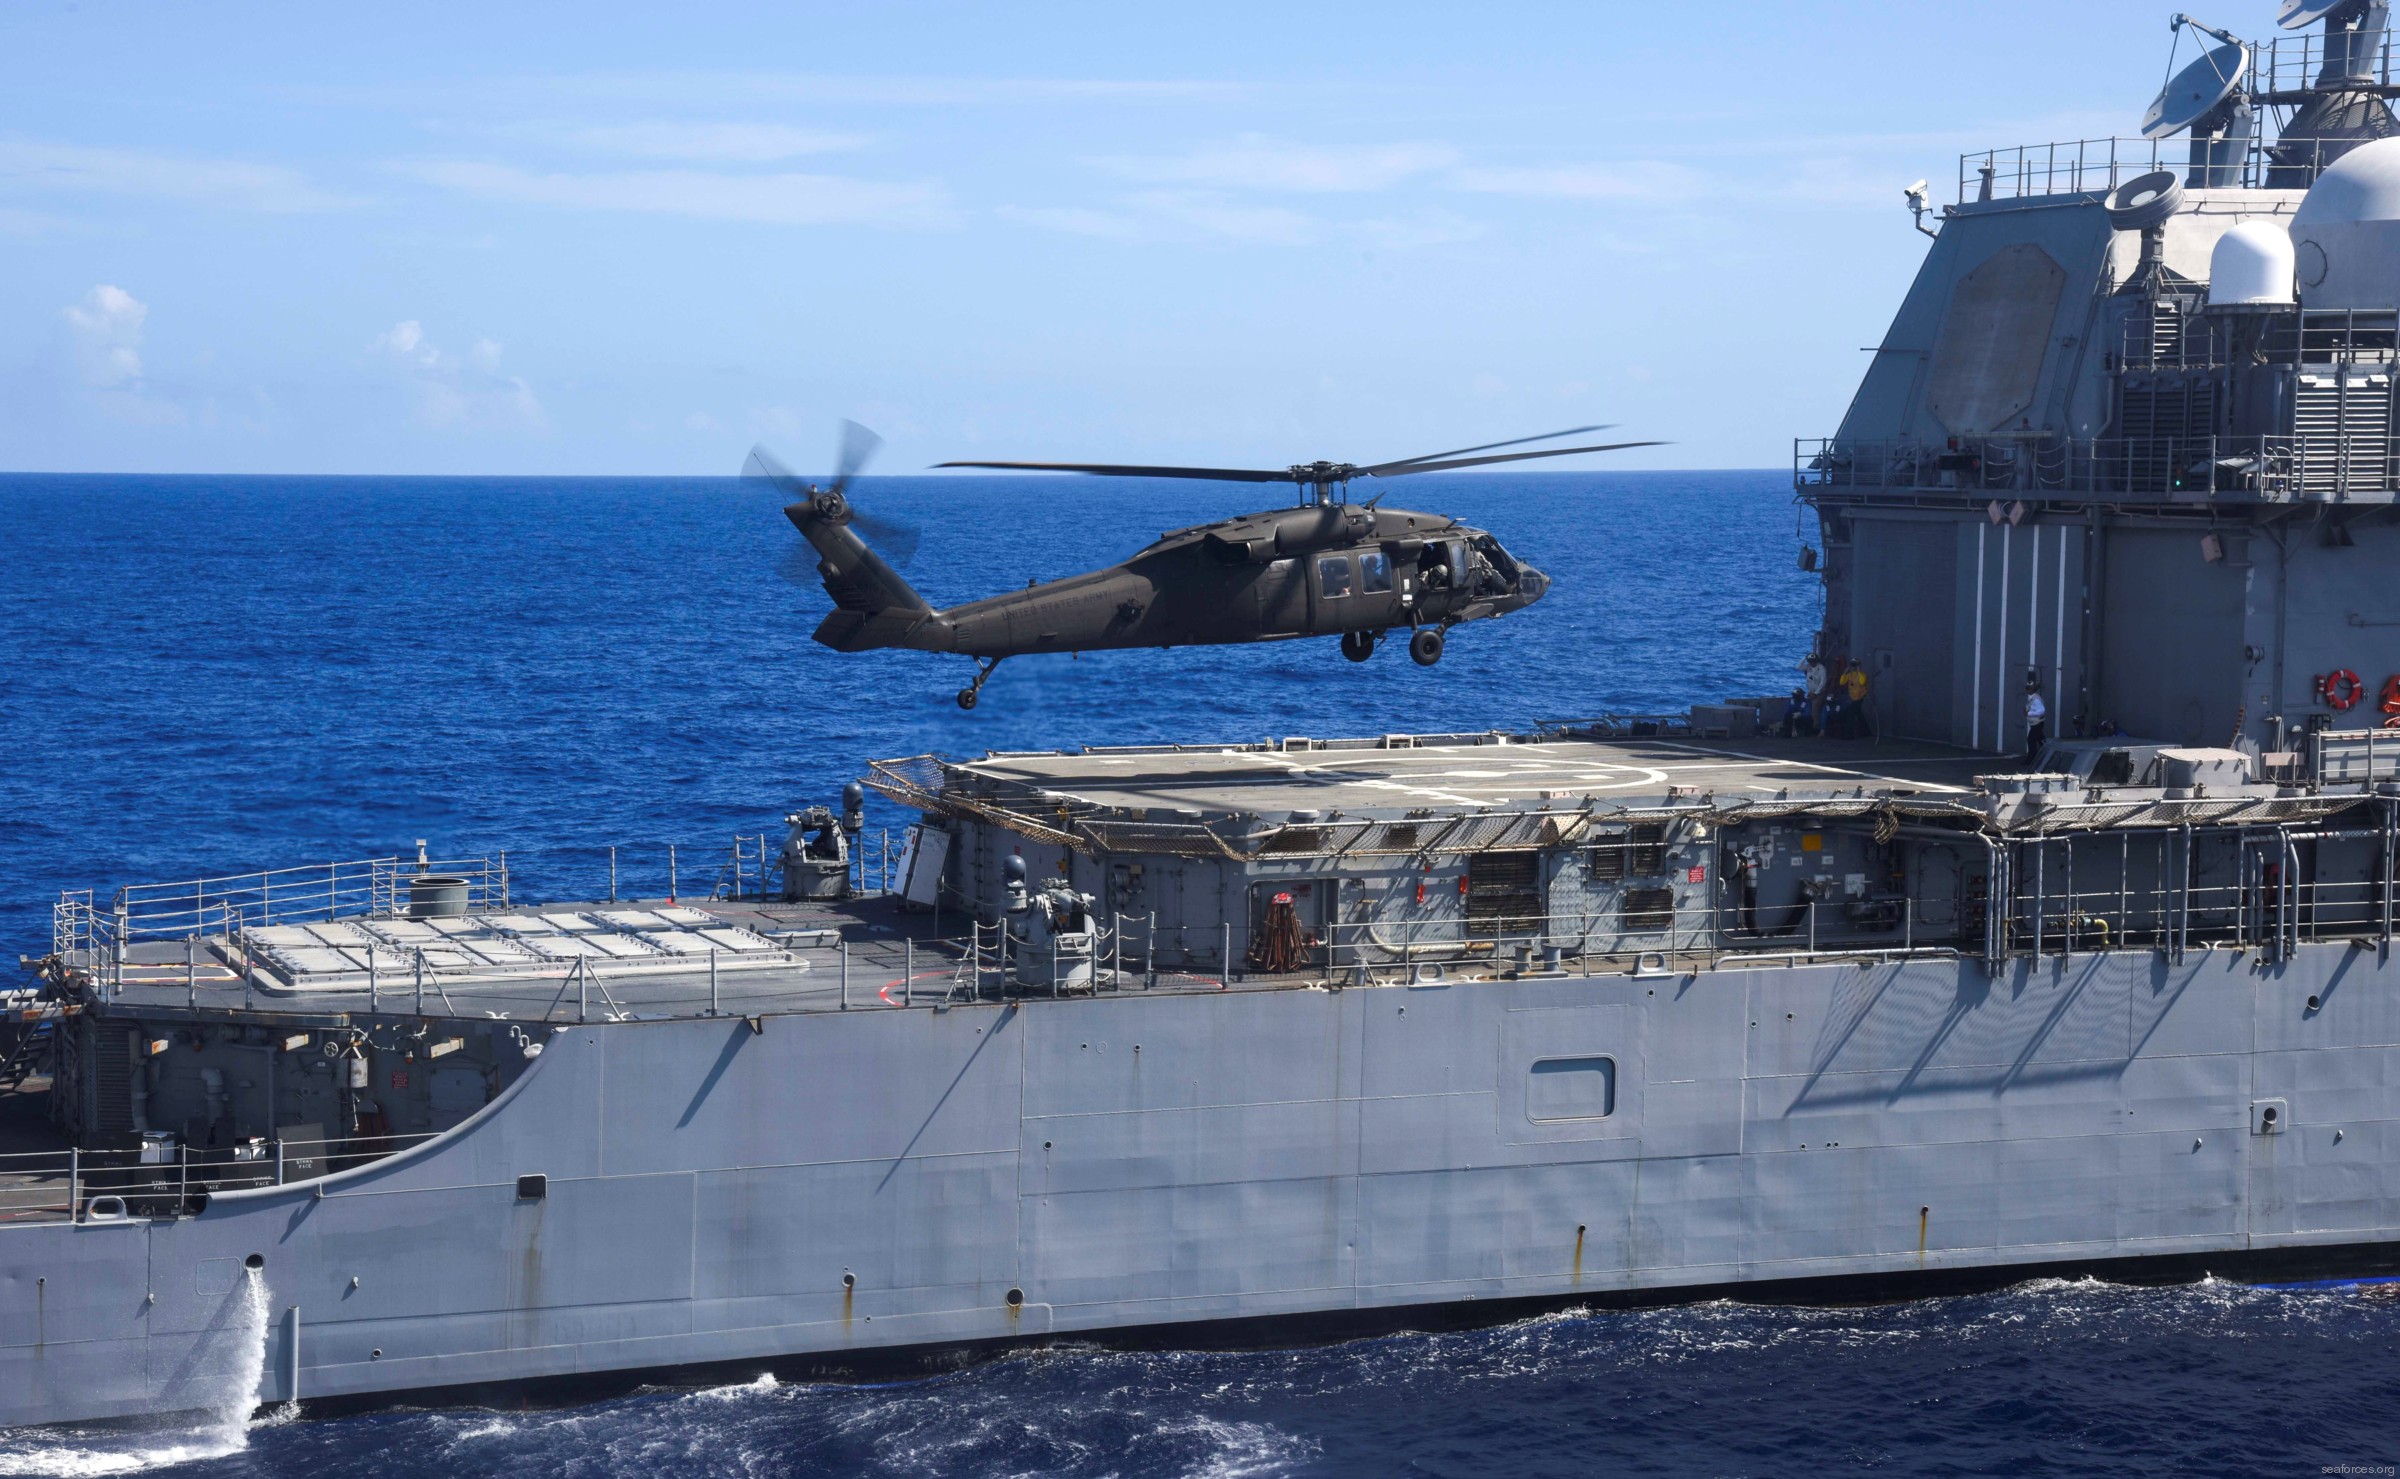 cg-73 uss port royal ticonderoga class guided missile cruiser navy 07 helicopter operations